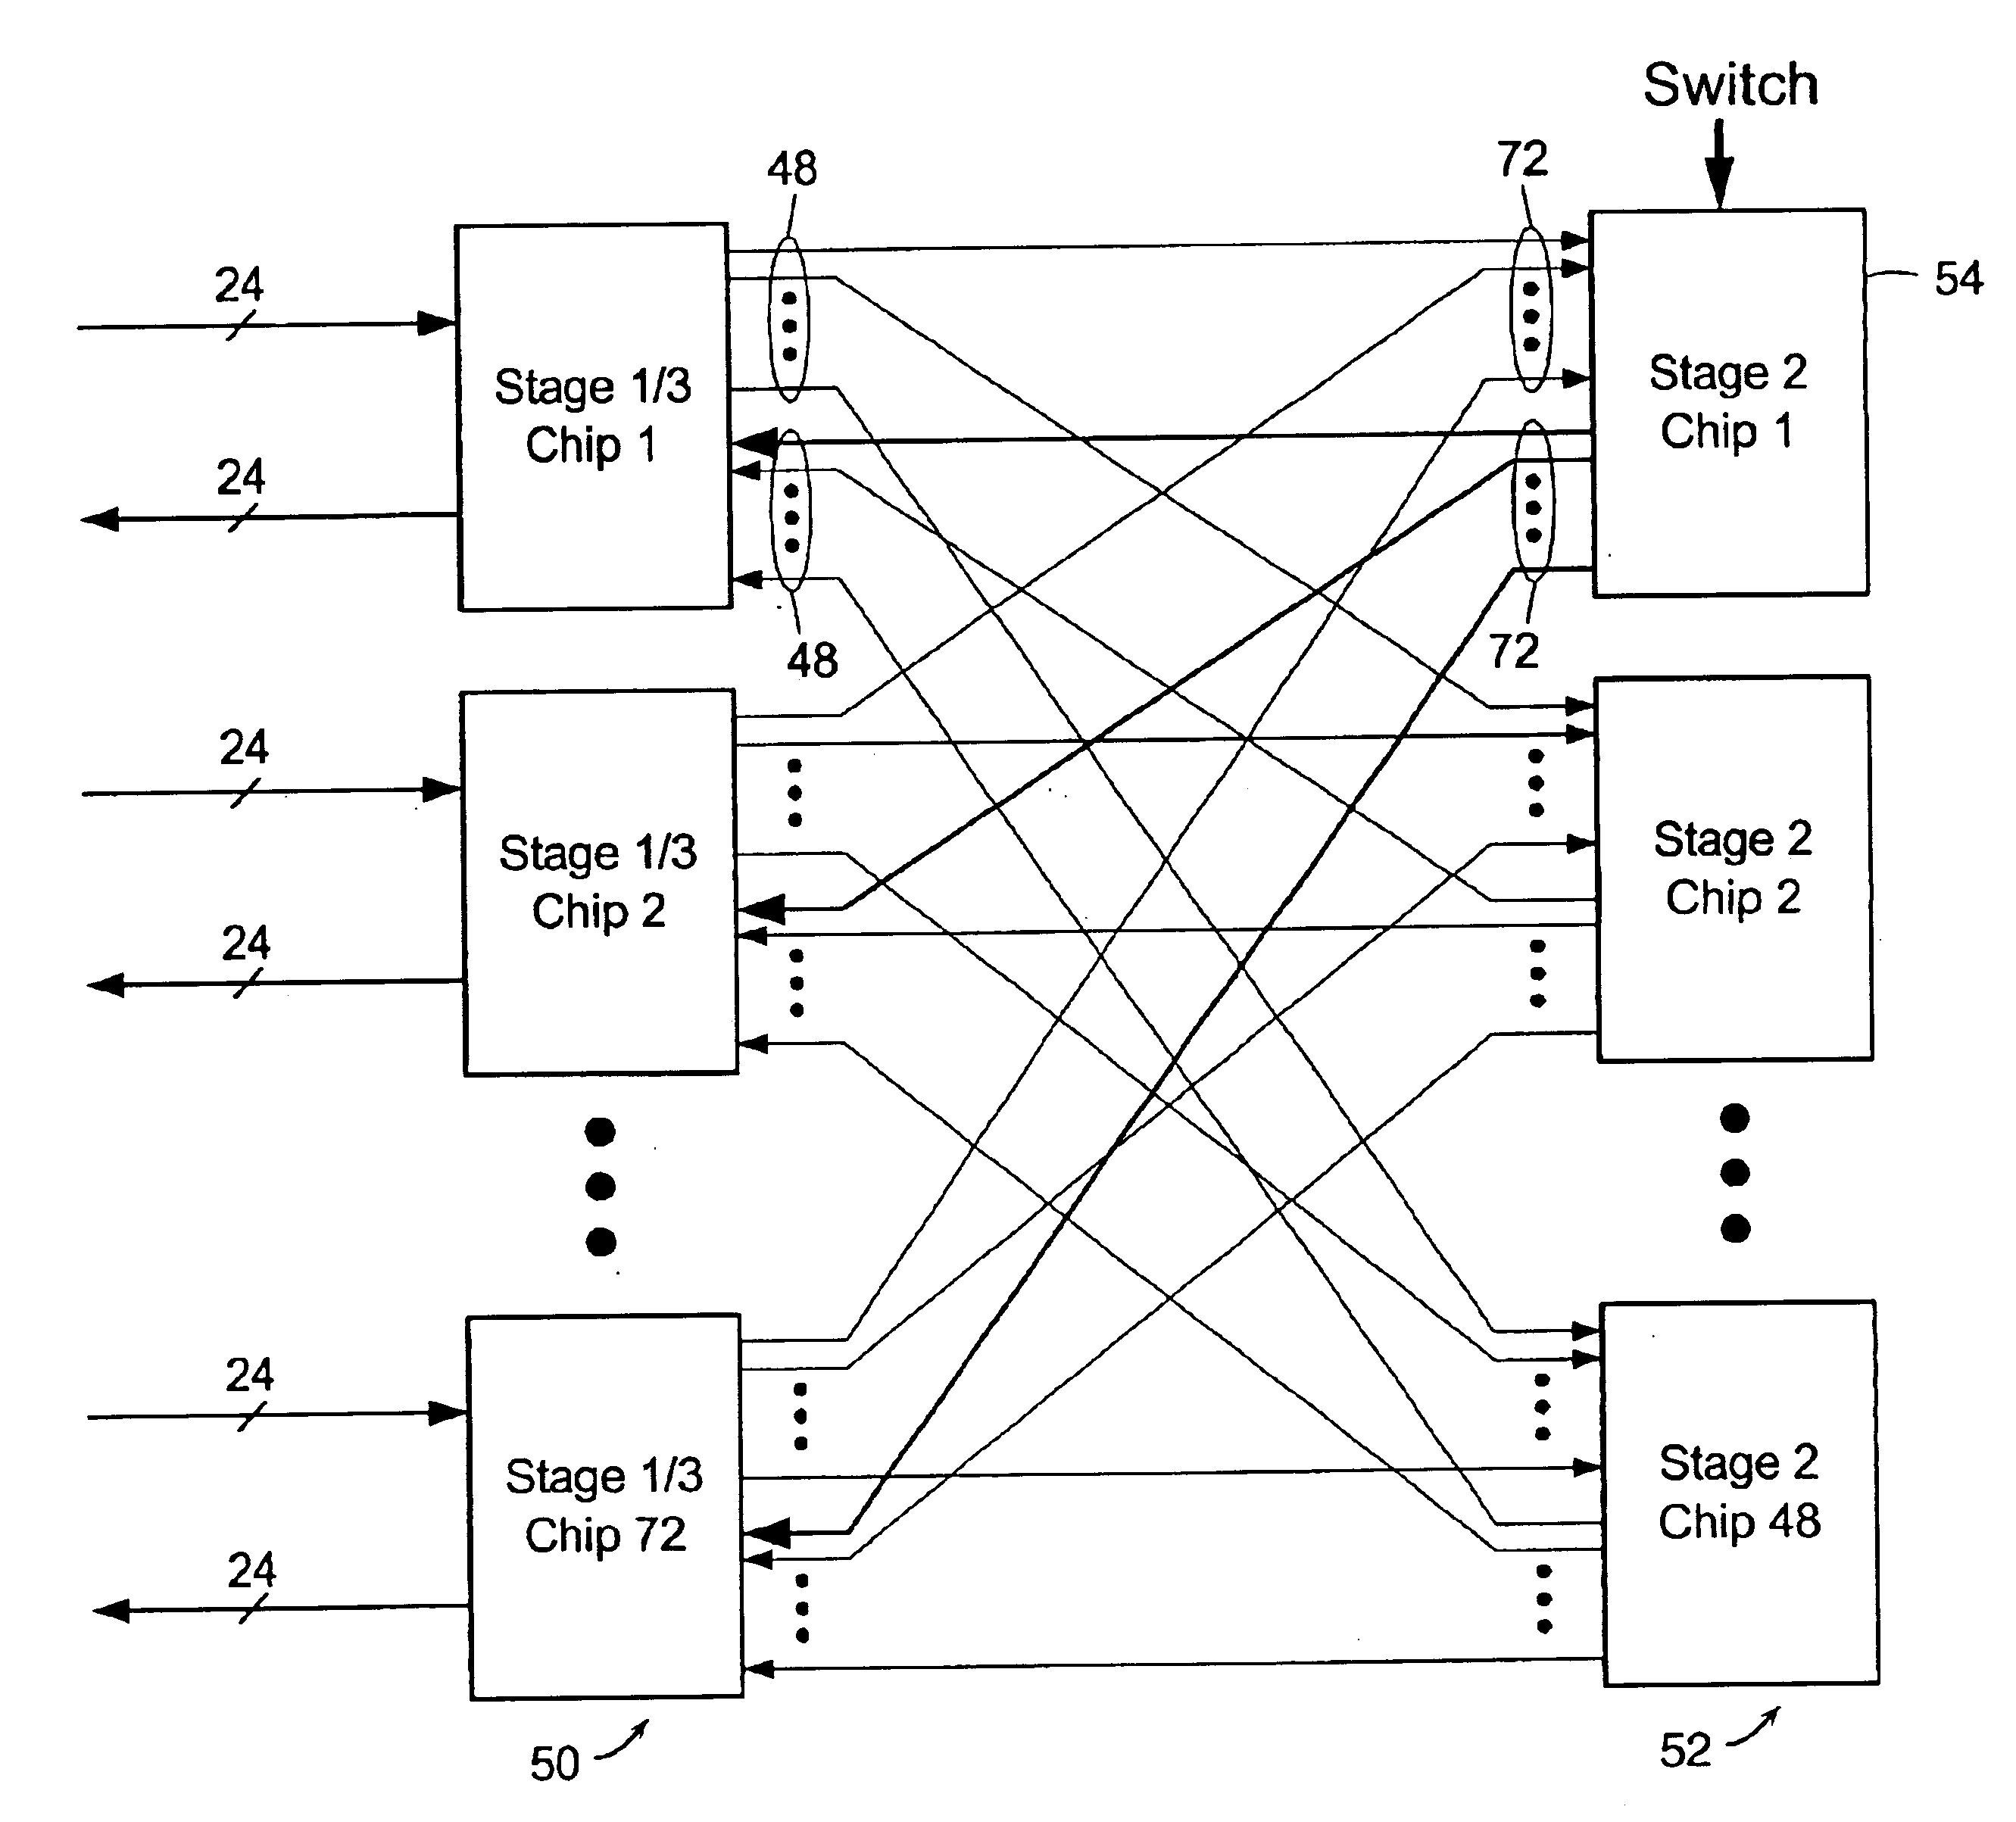 Multistage digital cross connect with integral frame timing